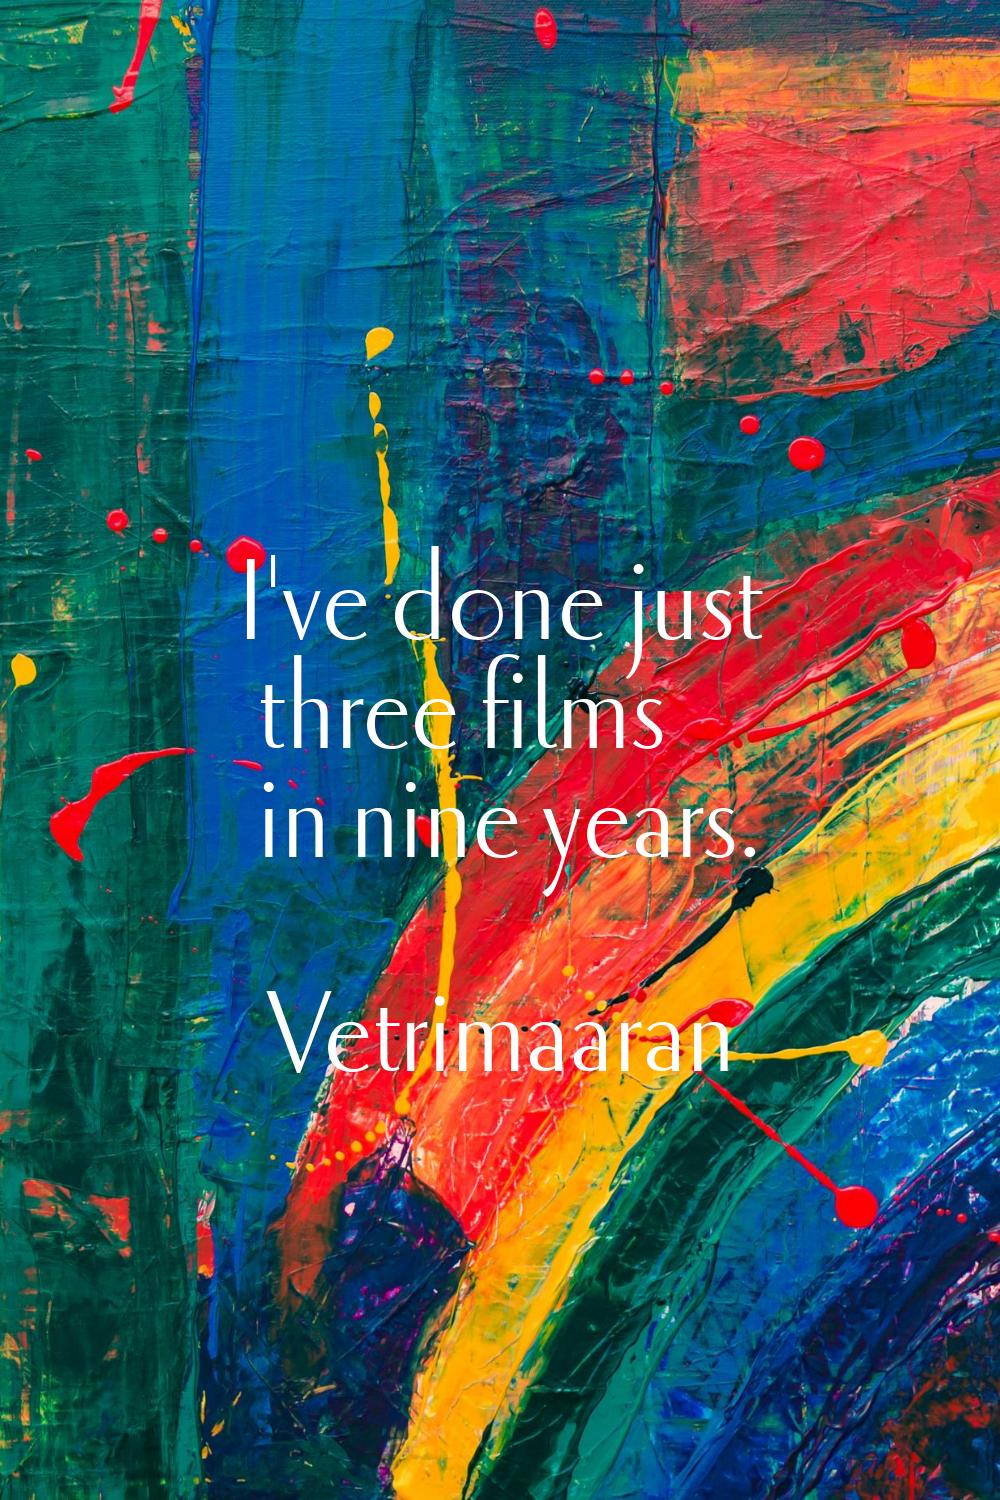 I've done just three films in nine years.